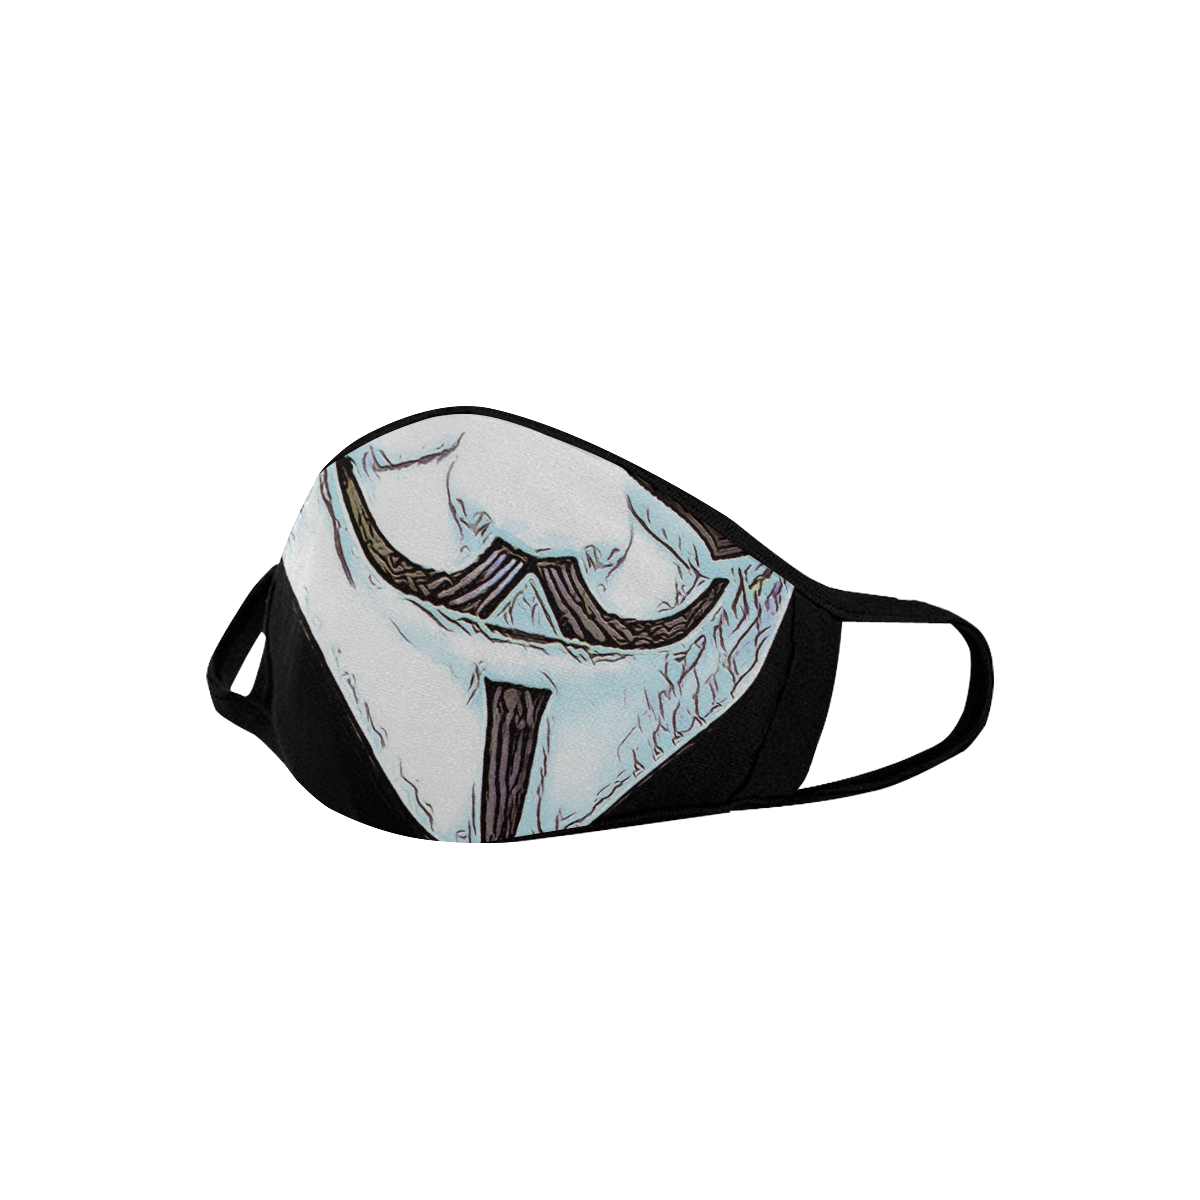 ANONYMUS MASK Mouth Mask